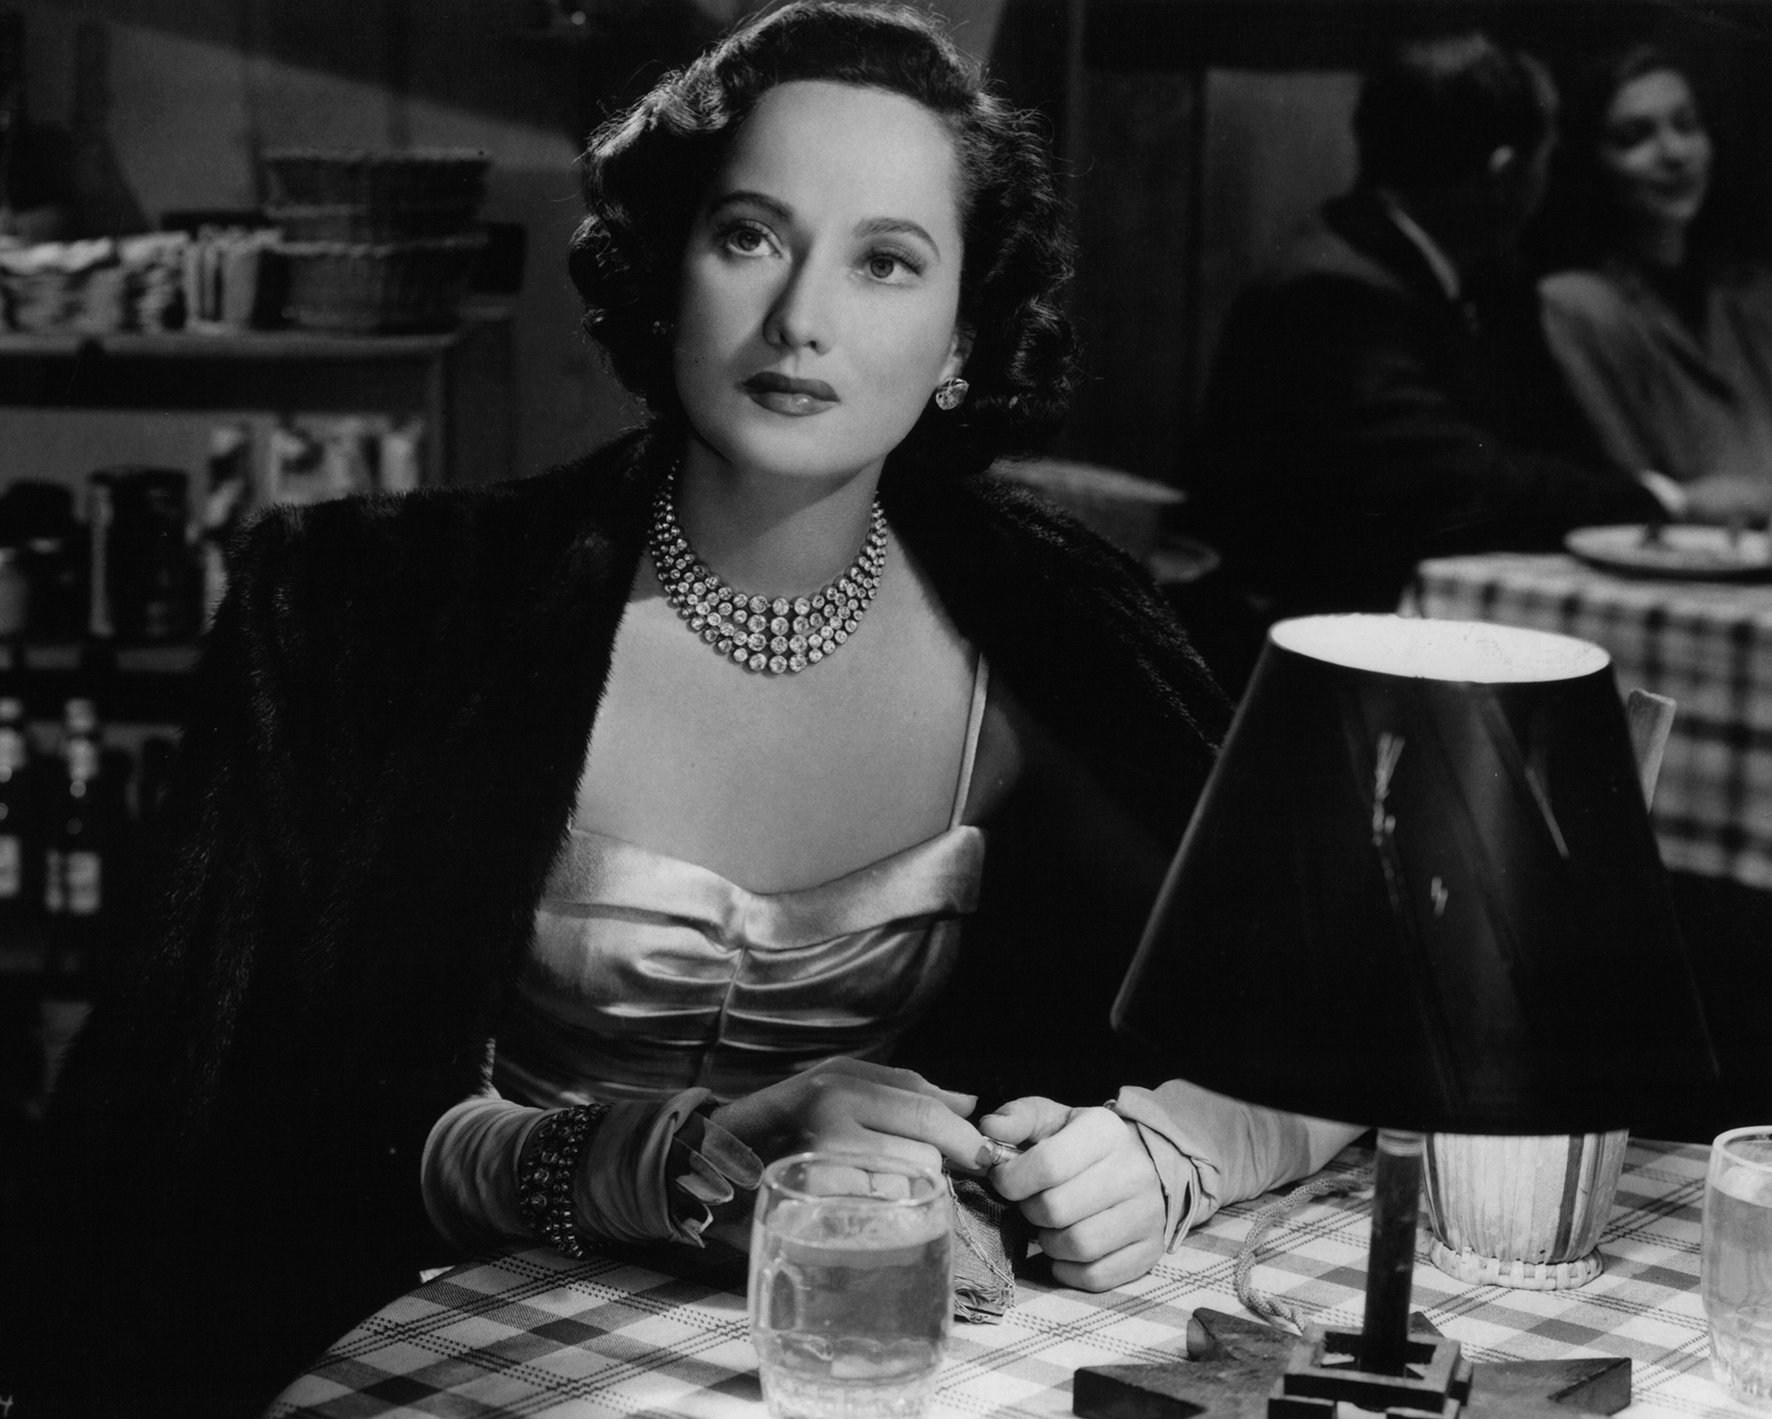 Merle Oberon in RKO's 1948 movie, "Night Song" | Source: Getty Images